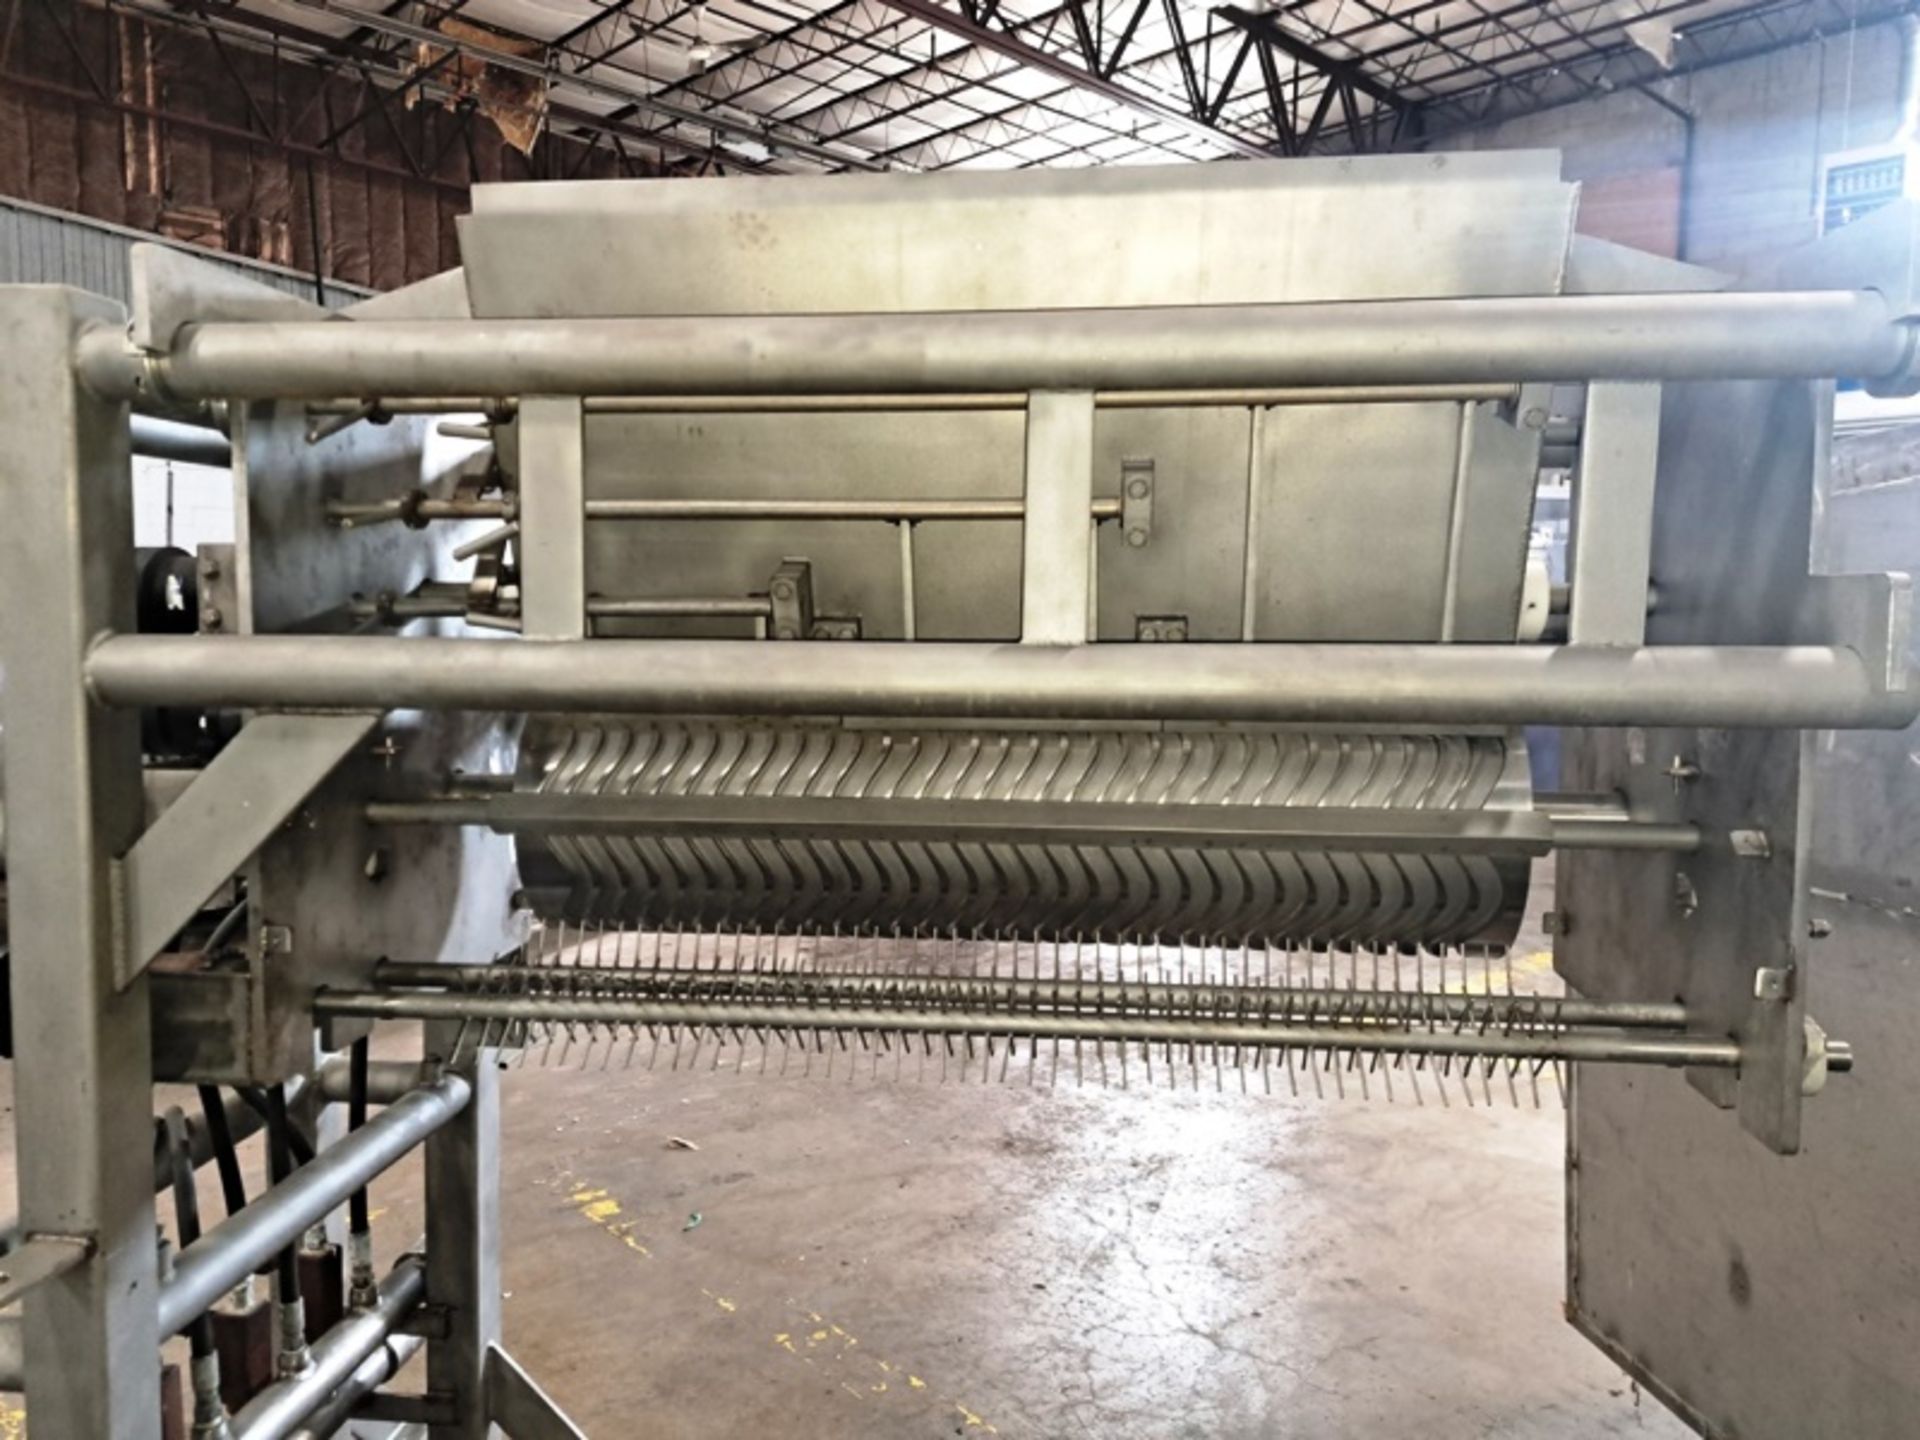 Stainless Steel Pizza Topping Applicator, 48" wide hopper, hydraulic operation (Located in Plano, - Image 2 of 5